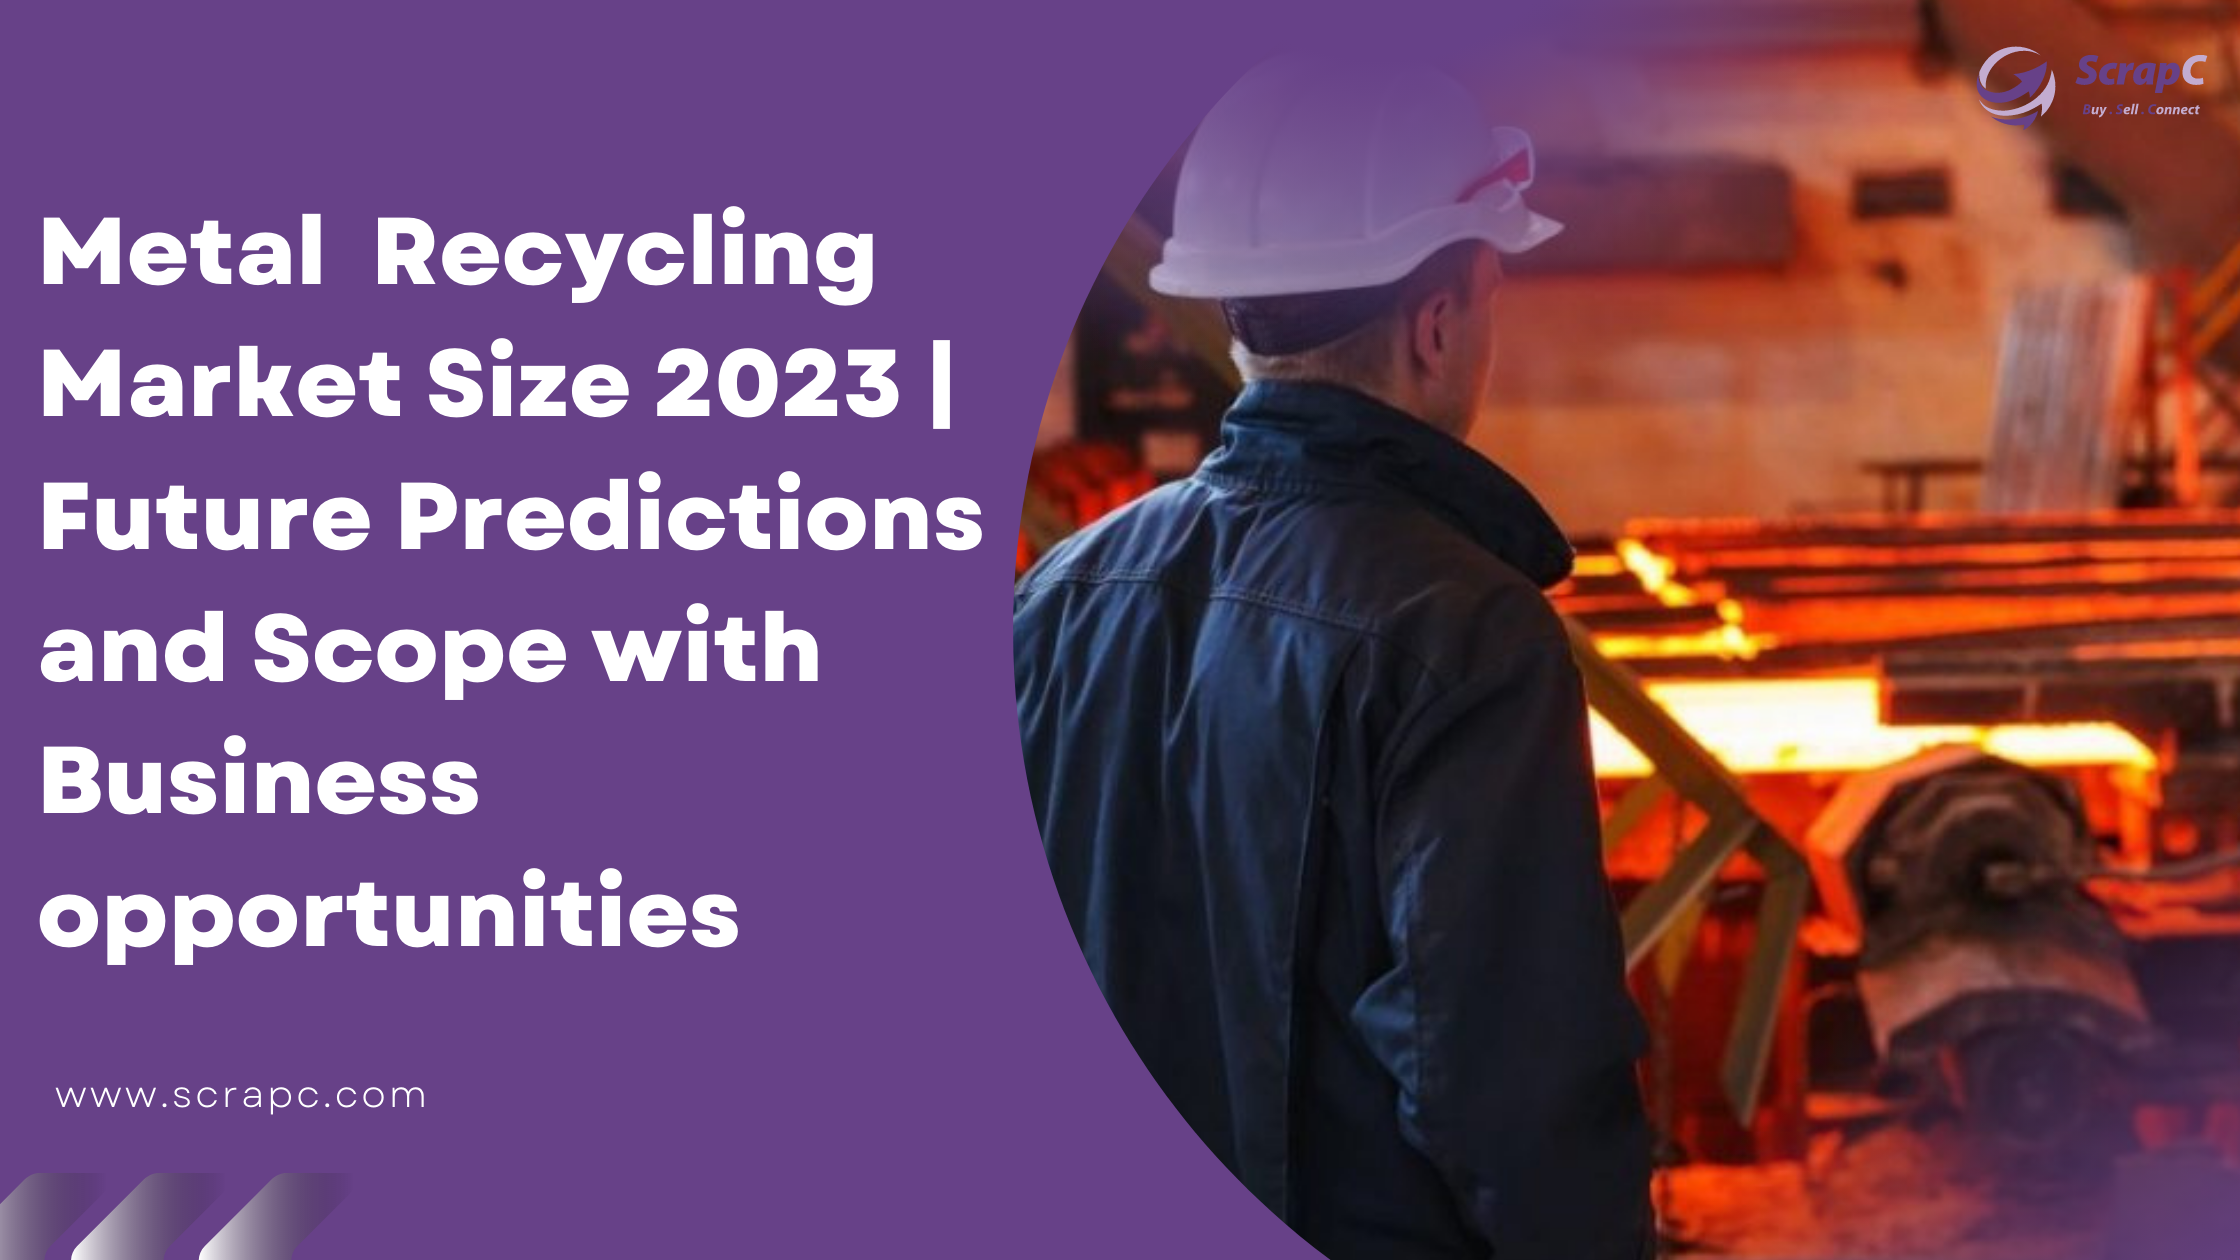 Metal Recycling Market Size 2023 Infographic